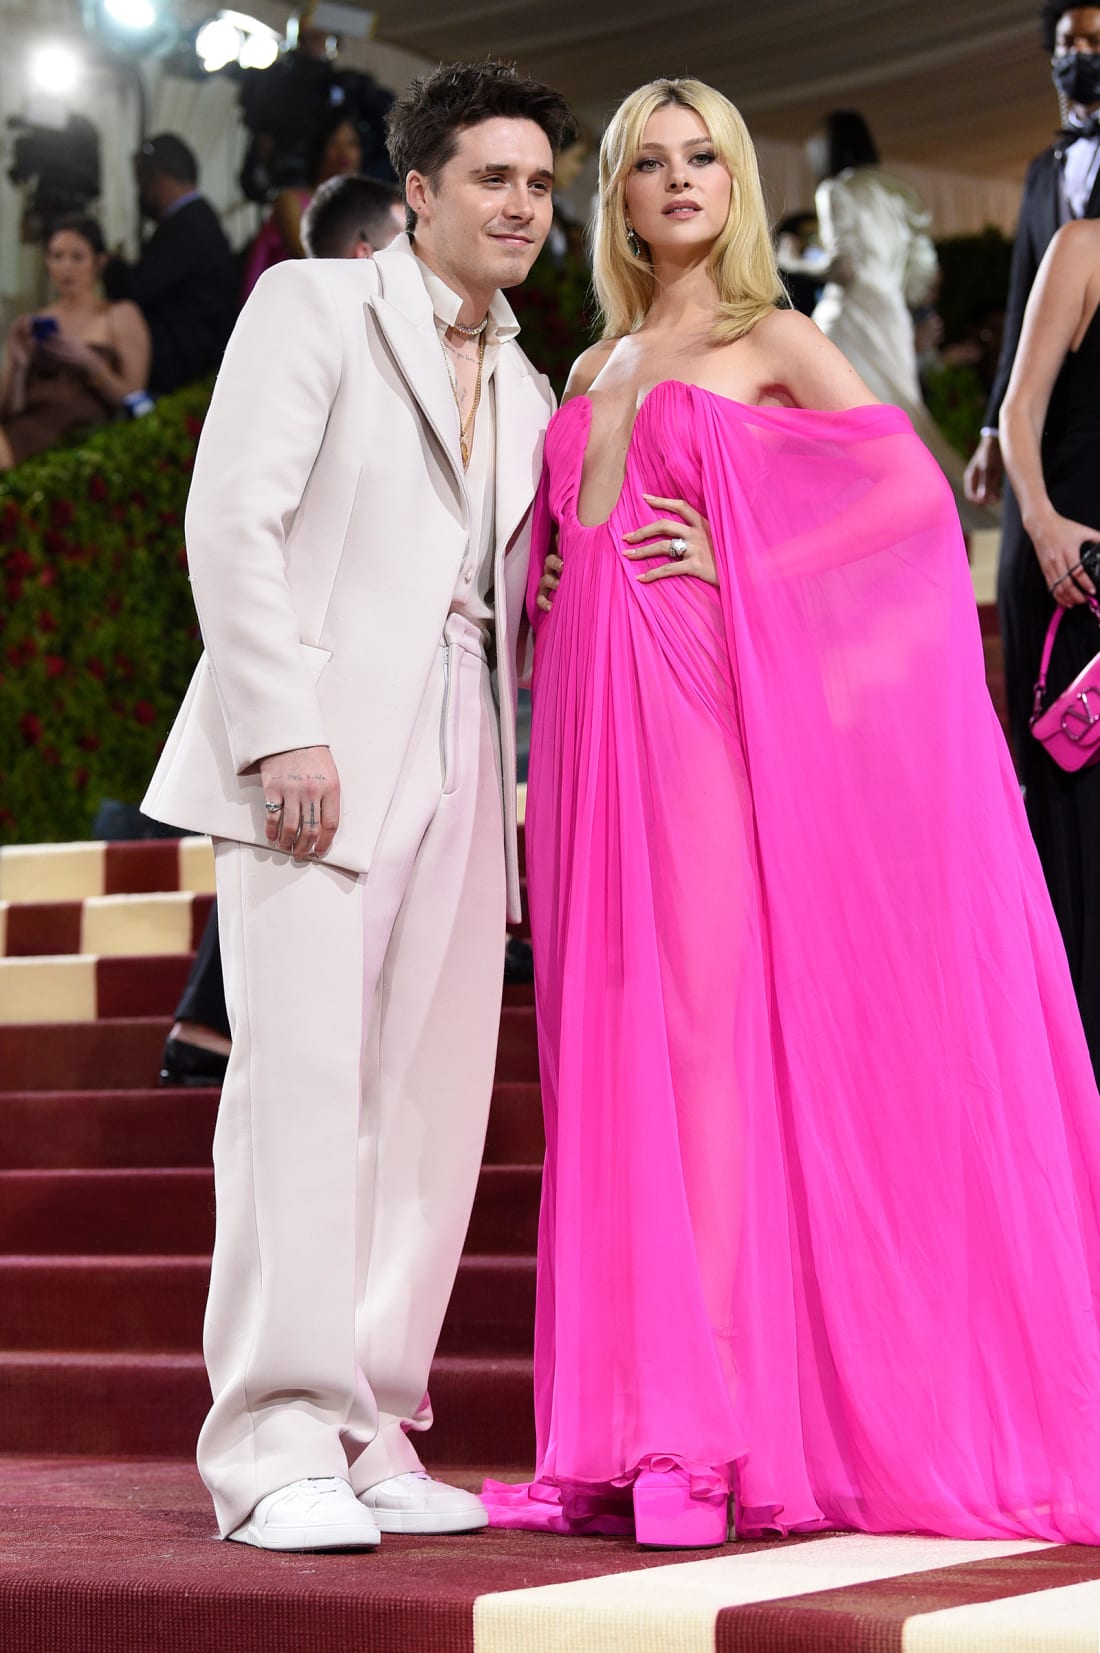 Brooklyn Beckham and Nicola Peltz both opted for Maison Valentino creations, with Peltz wearing a neon pink gown with a plunging neckline in contrast to Beckham's ivory suit. 